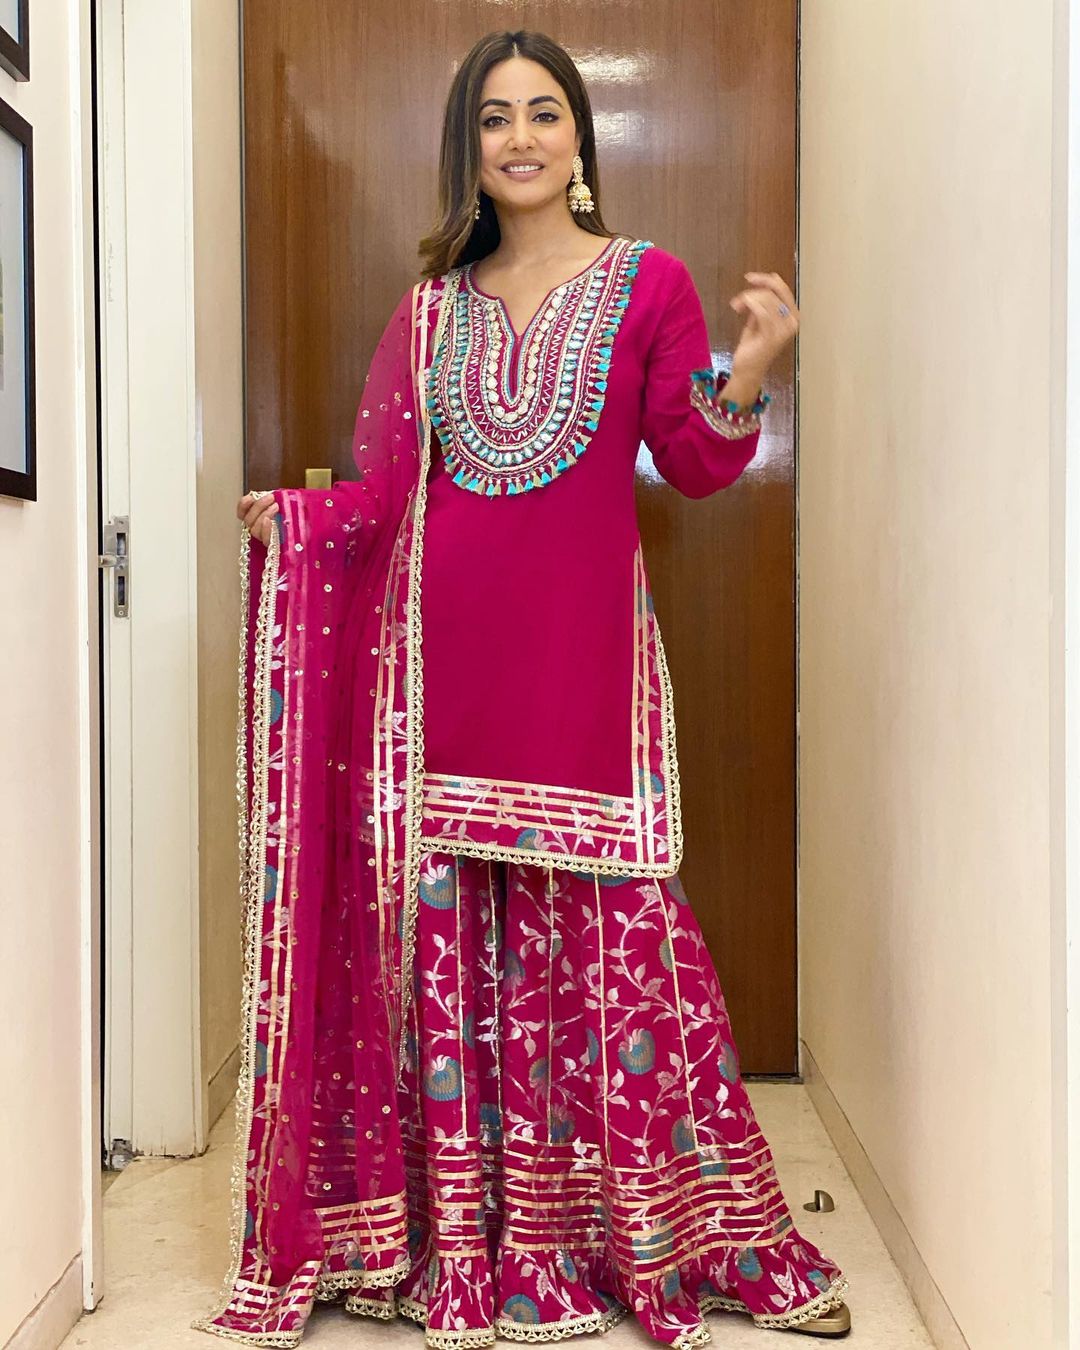 Hina Khan's Pink Modern Floral Sharara Suit Is An Ethnic Inspiration For Every Girl